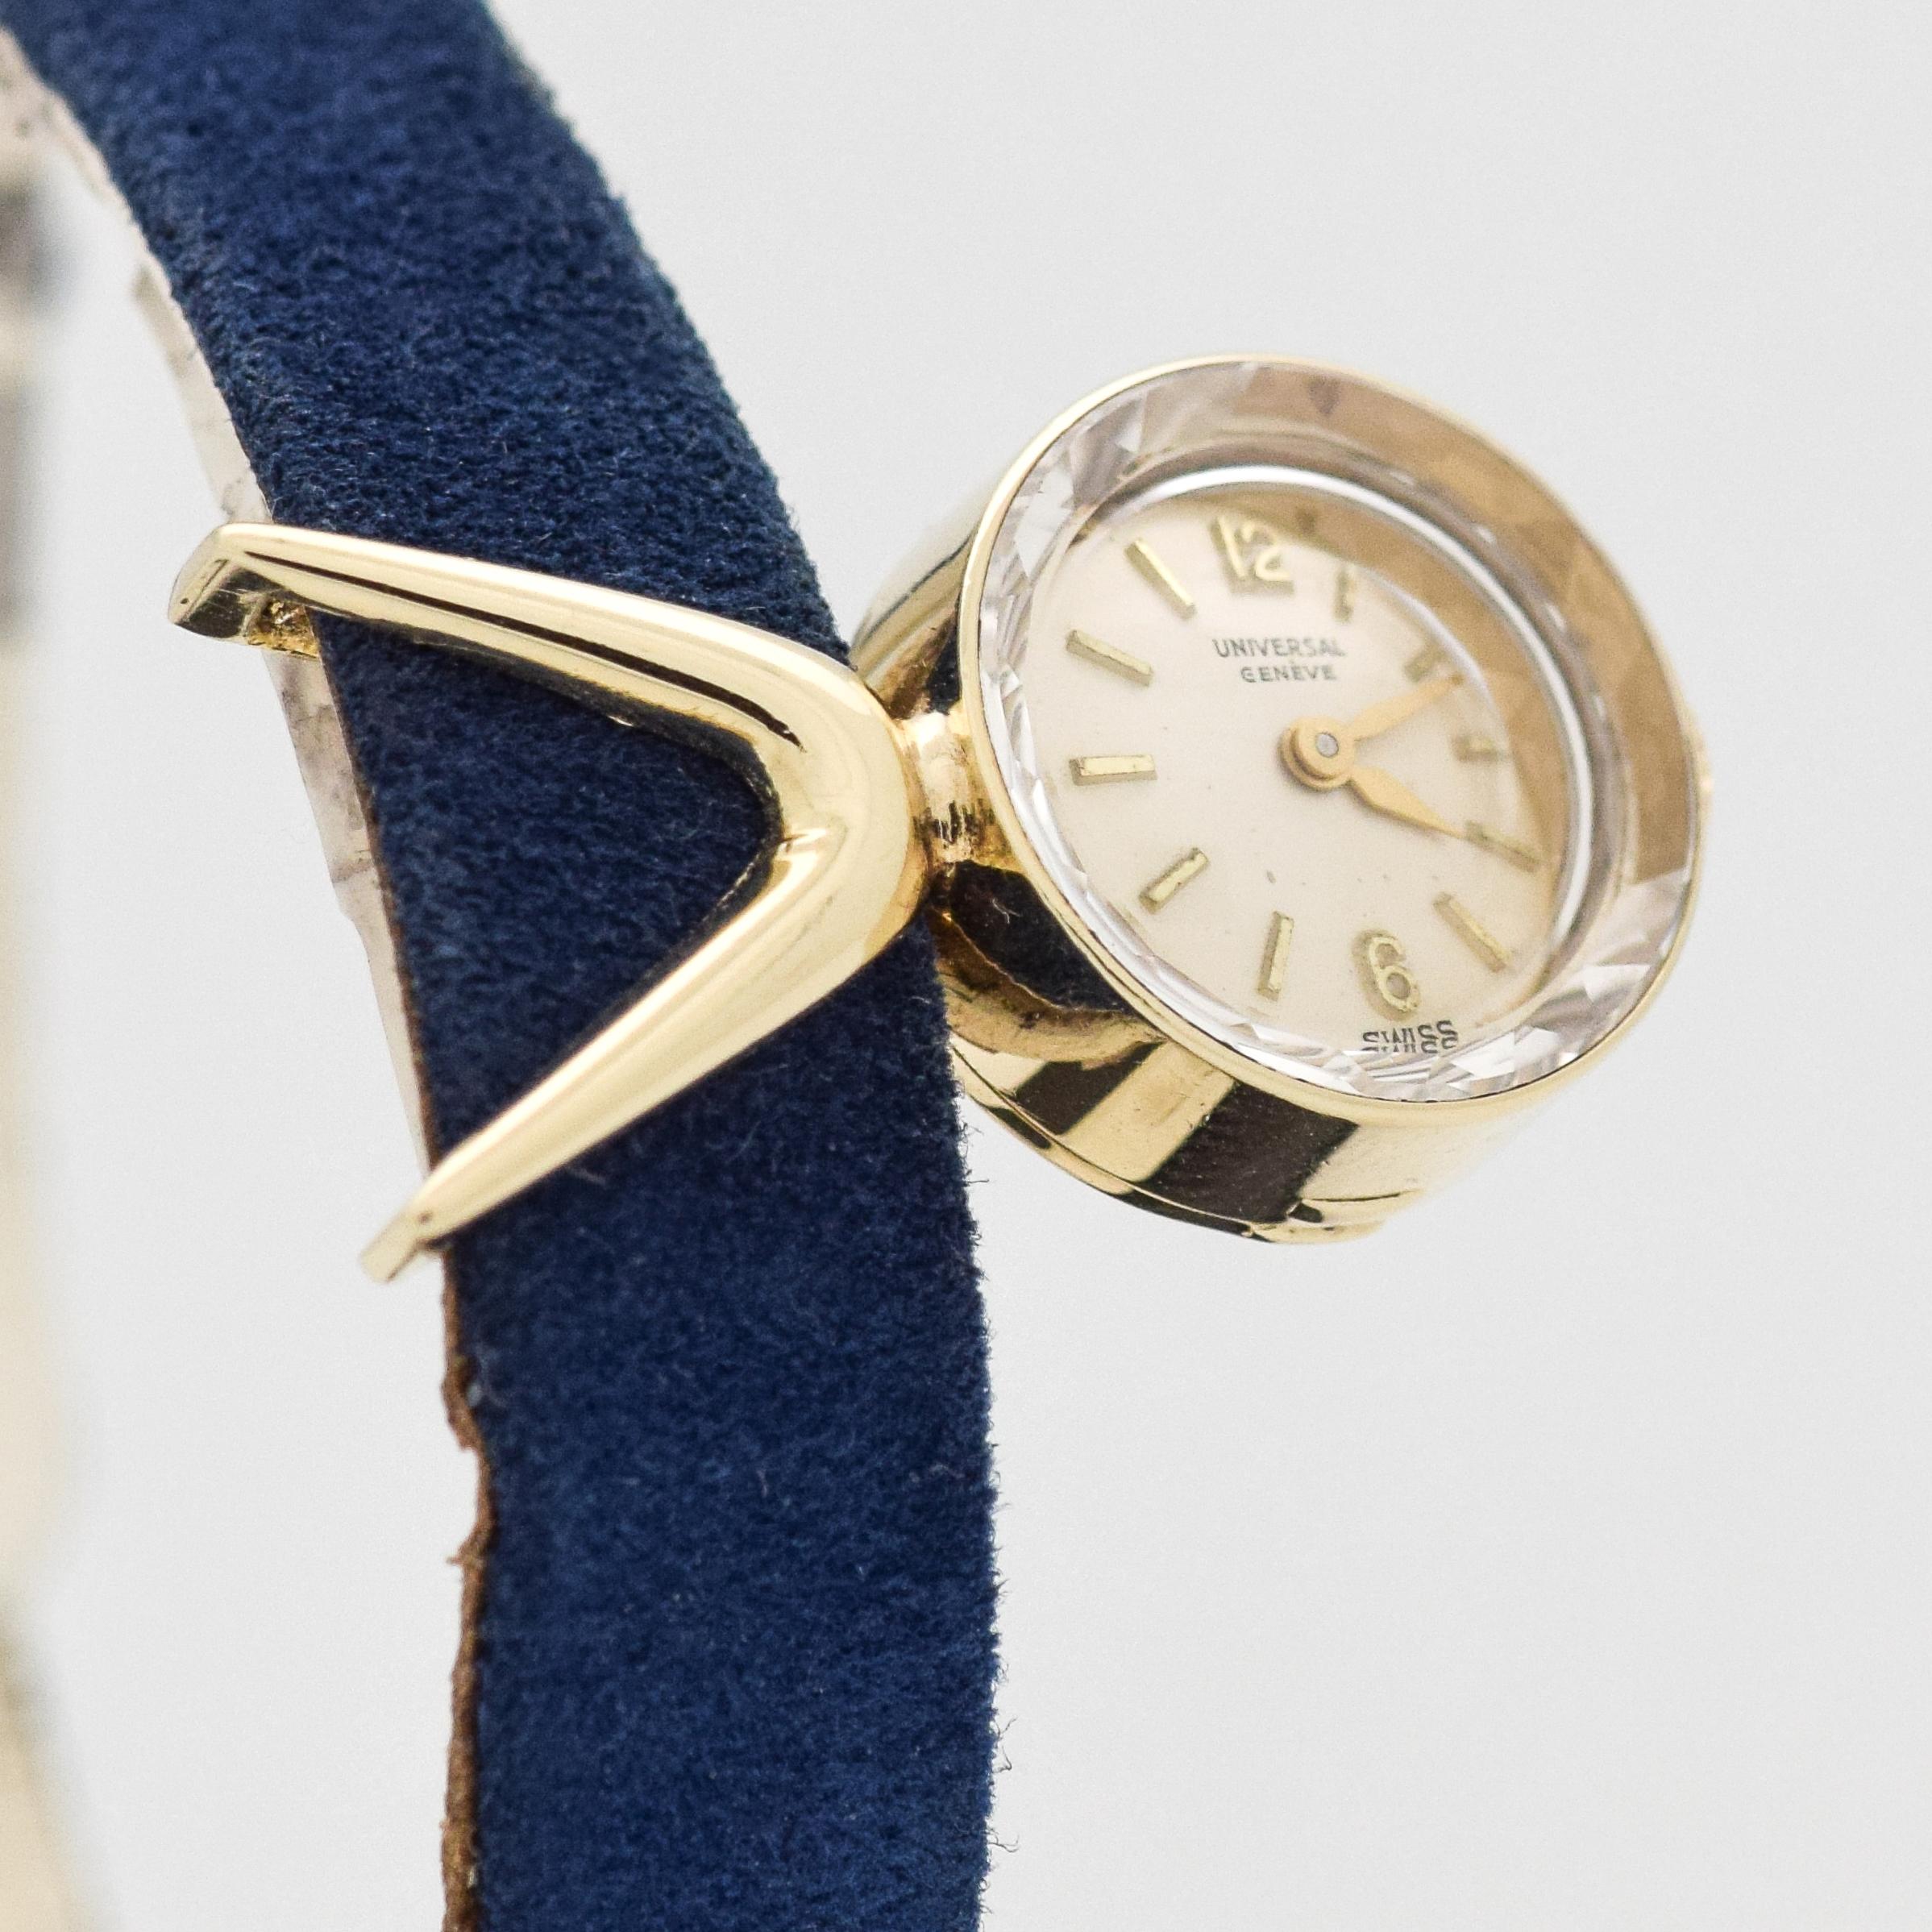 1960's Vintage Universal Geneve Ladies Unique Chameleon 14k Yellow Gold watch with Original Silver Dial with Applied Gold Arabic 6 and 12 with Stick/Bar/Baton Markers. 24mm x 15mm lug to lug (0.94 in. x 0.59 in.) - 17 jewel, manual caliber movement. 